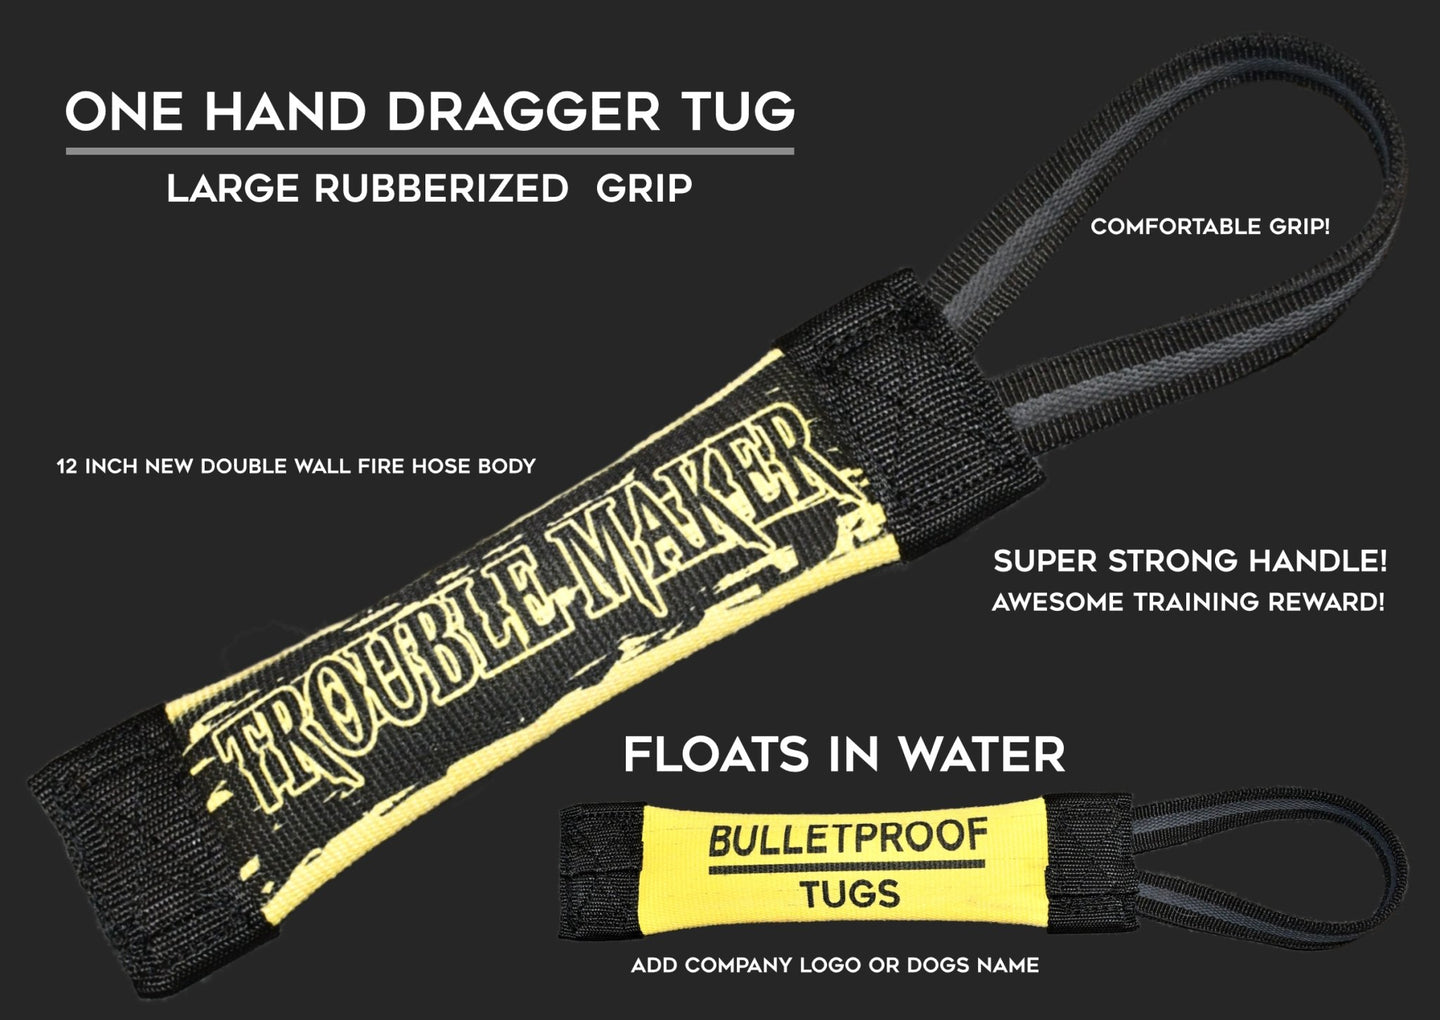 TROUBLEMAKER ONE HAND DRAGGER TRAINING FIRE HOSE TUG - Bulletproof Pet Products Inc